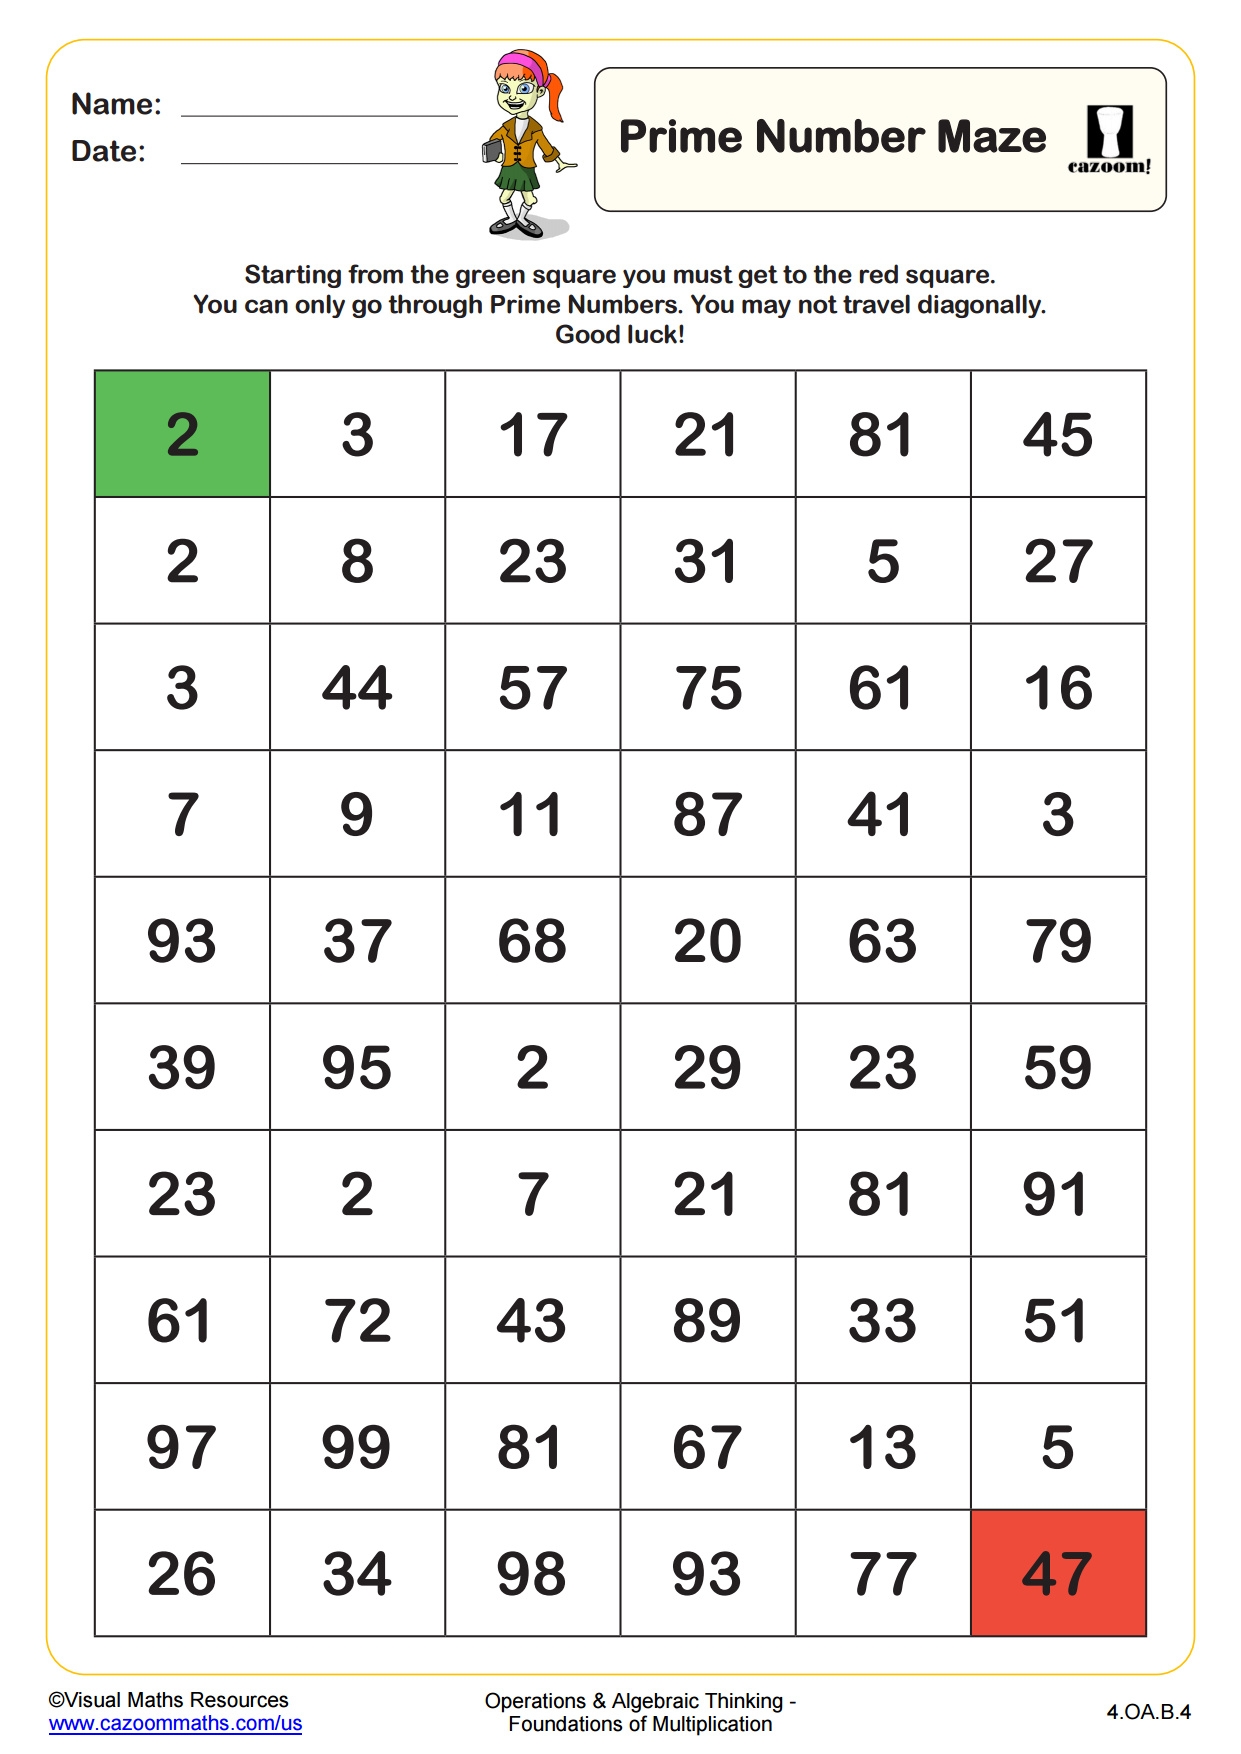 Prime Number Maze PDF Printable Operations And Algebraic Thinking Worksheets